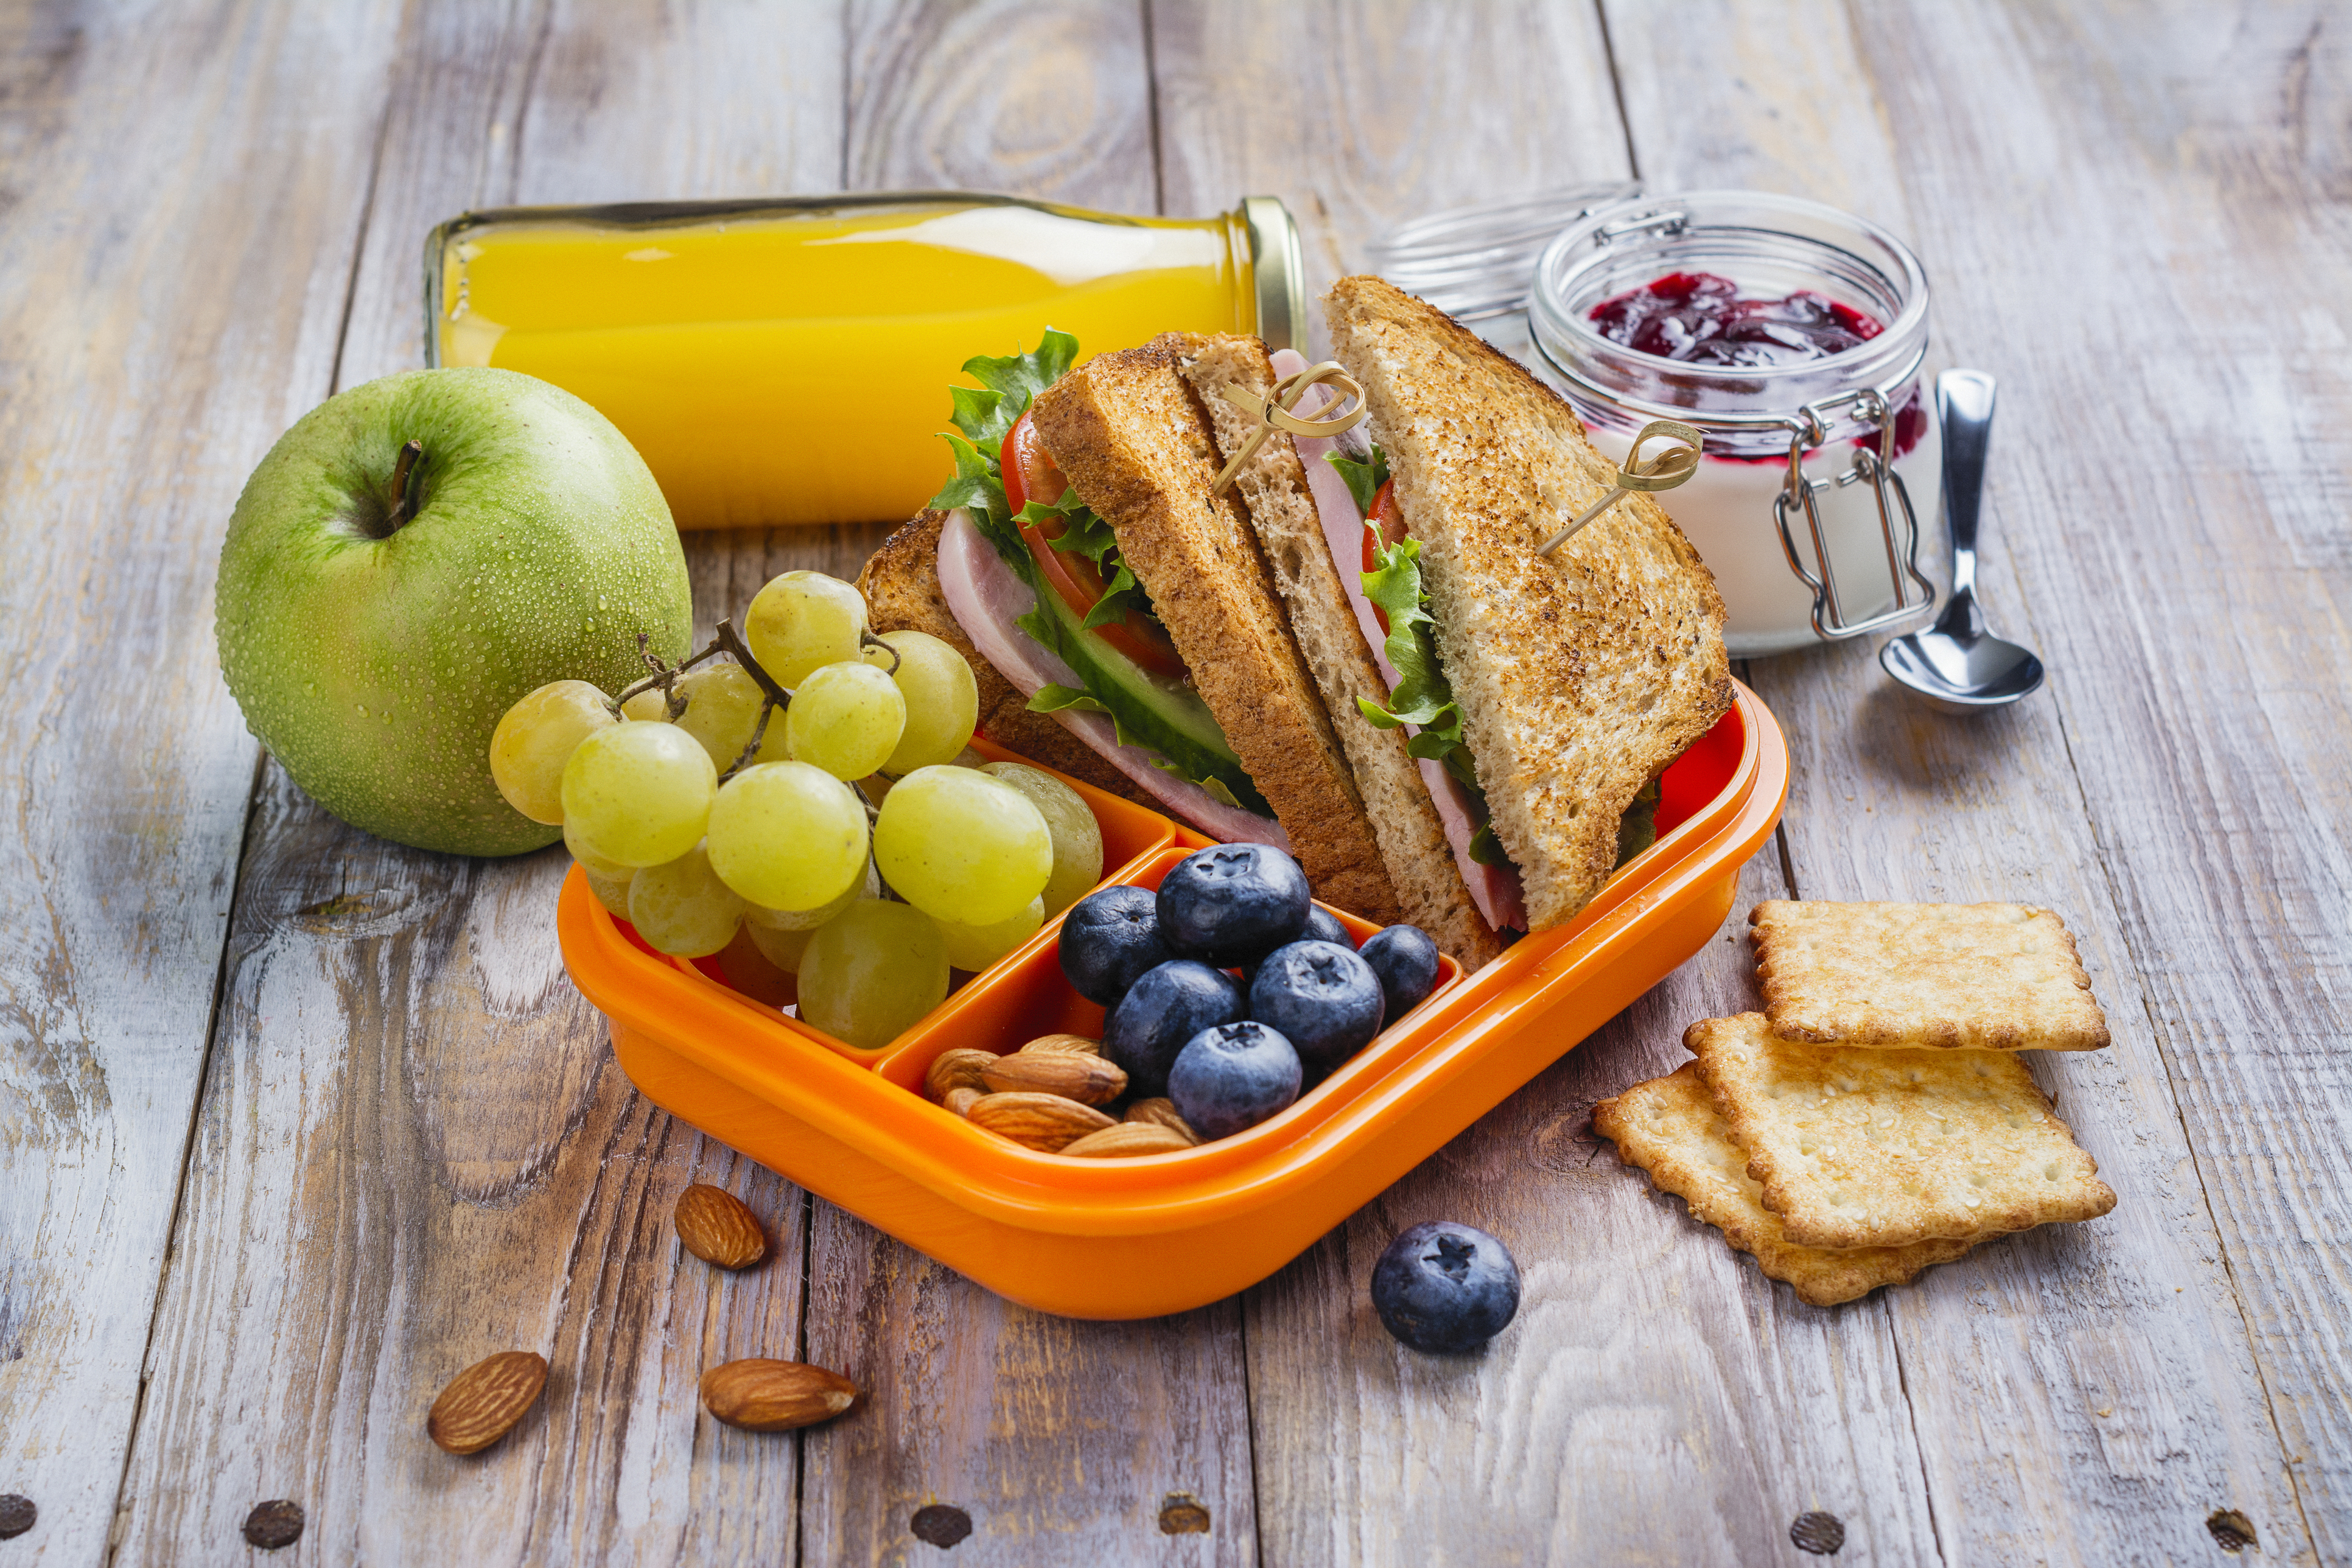 Healthy Sack Lunch with sandwich, fruit and juice